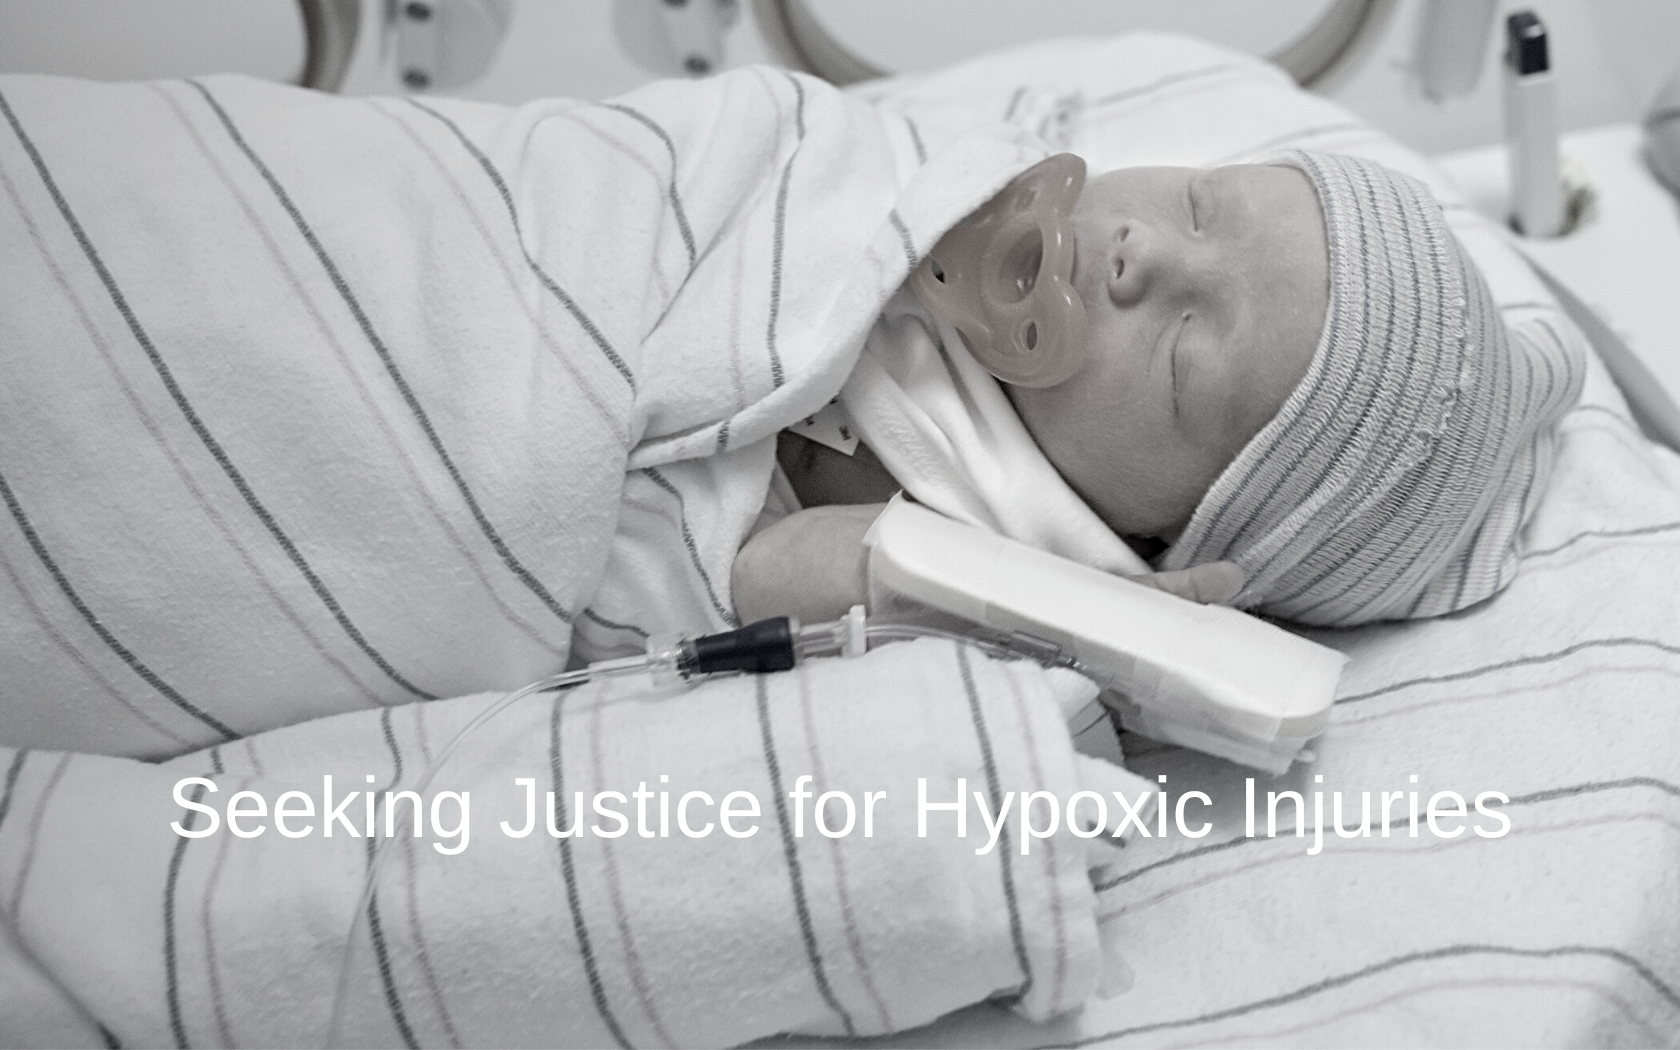 Baby with hypoxic brain injury.